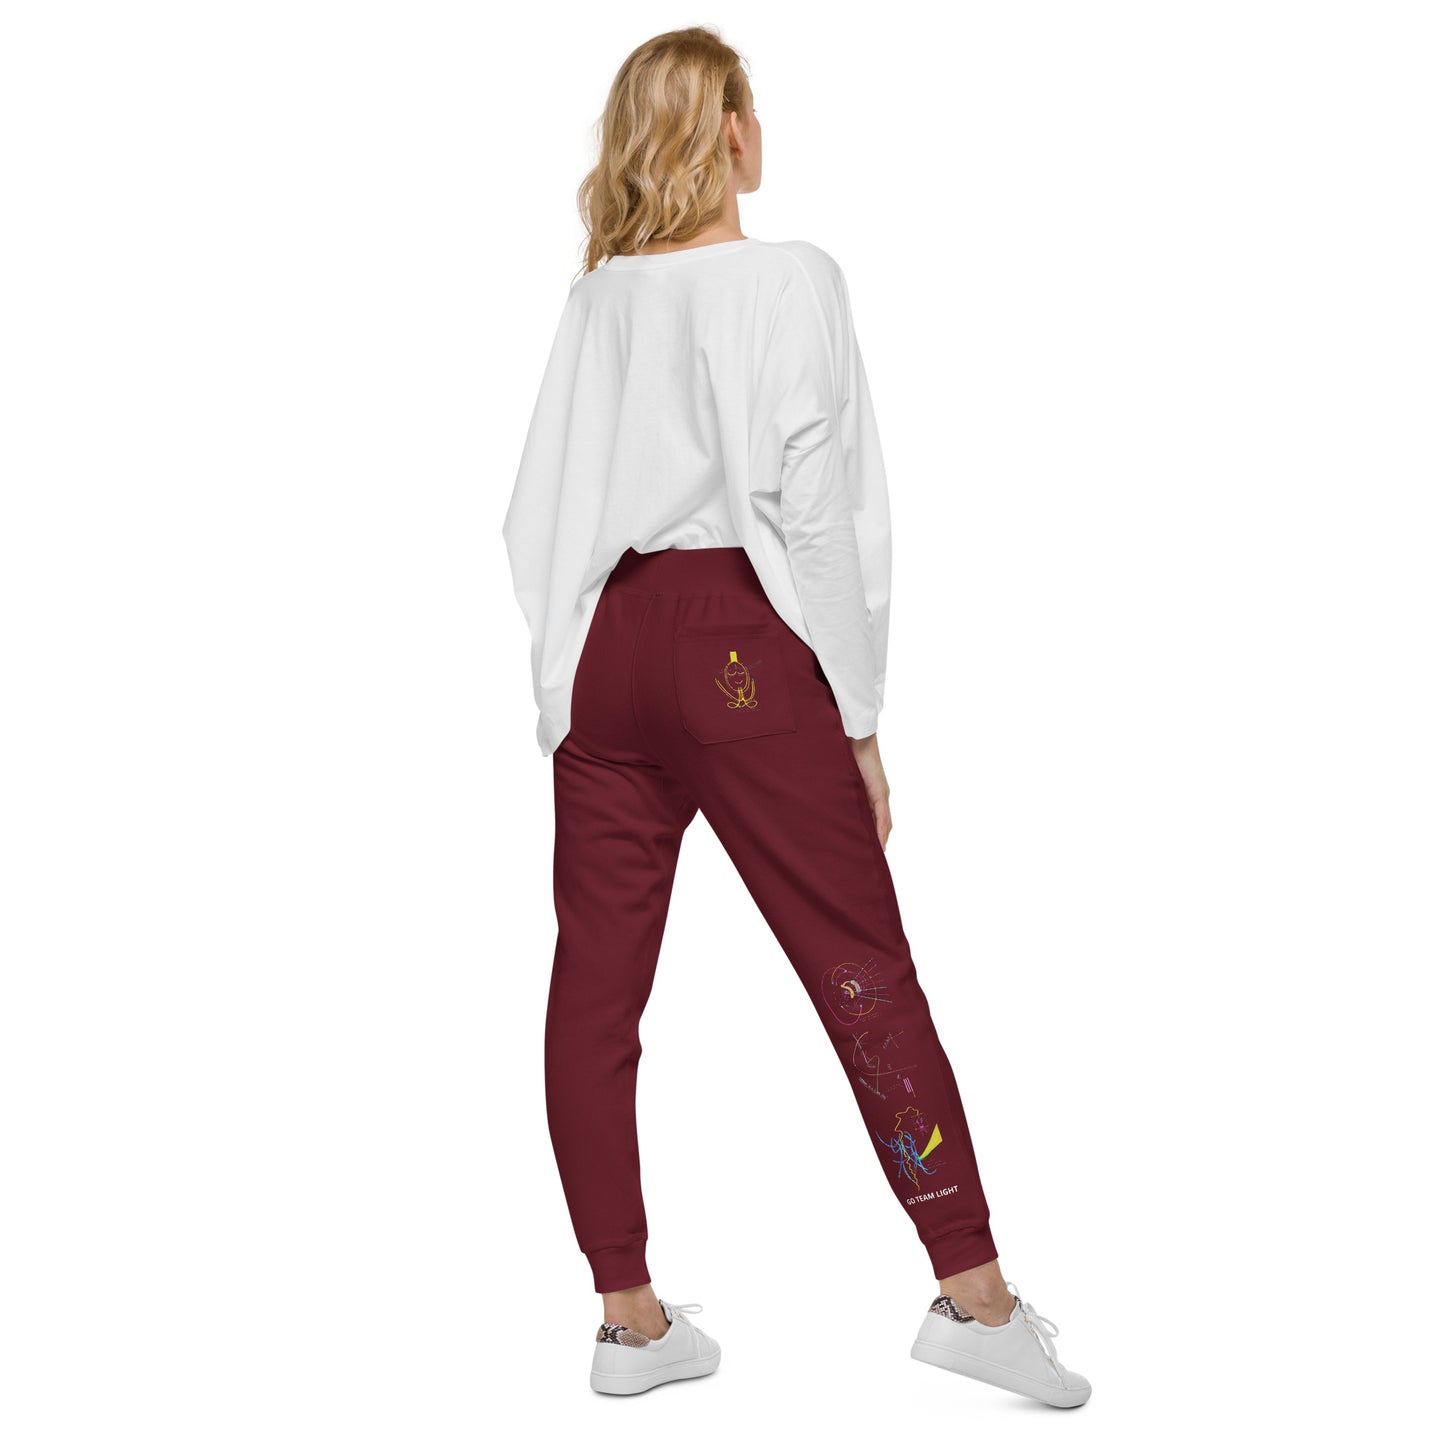 Seven Shields, 100% cotton joggers (in navy & maroon)